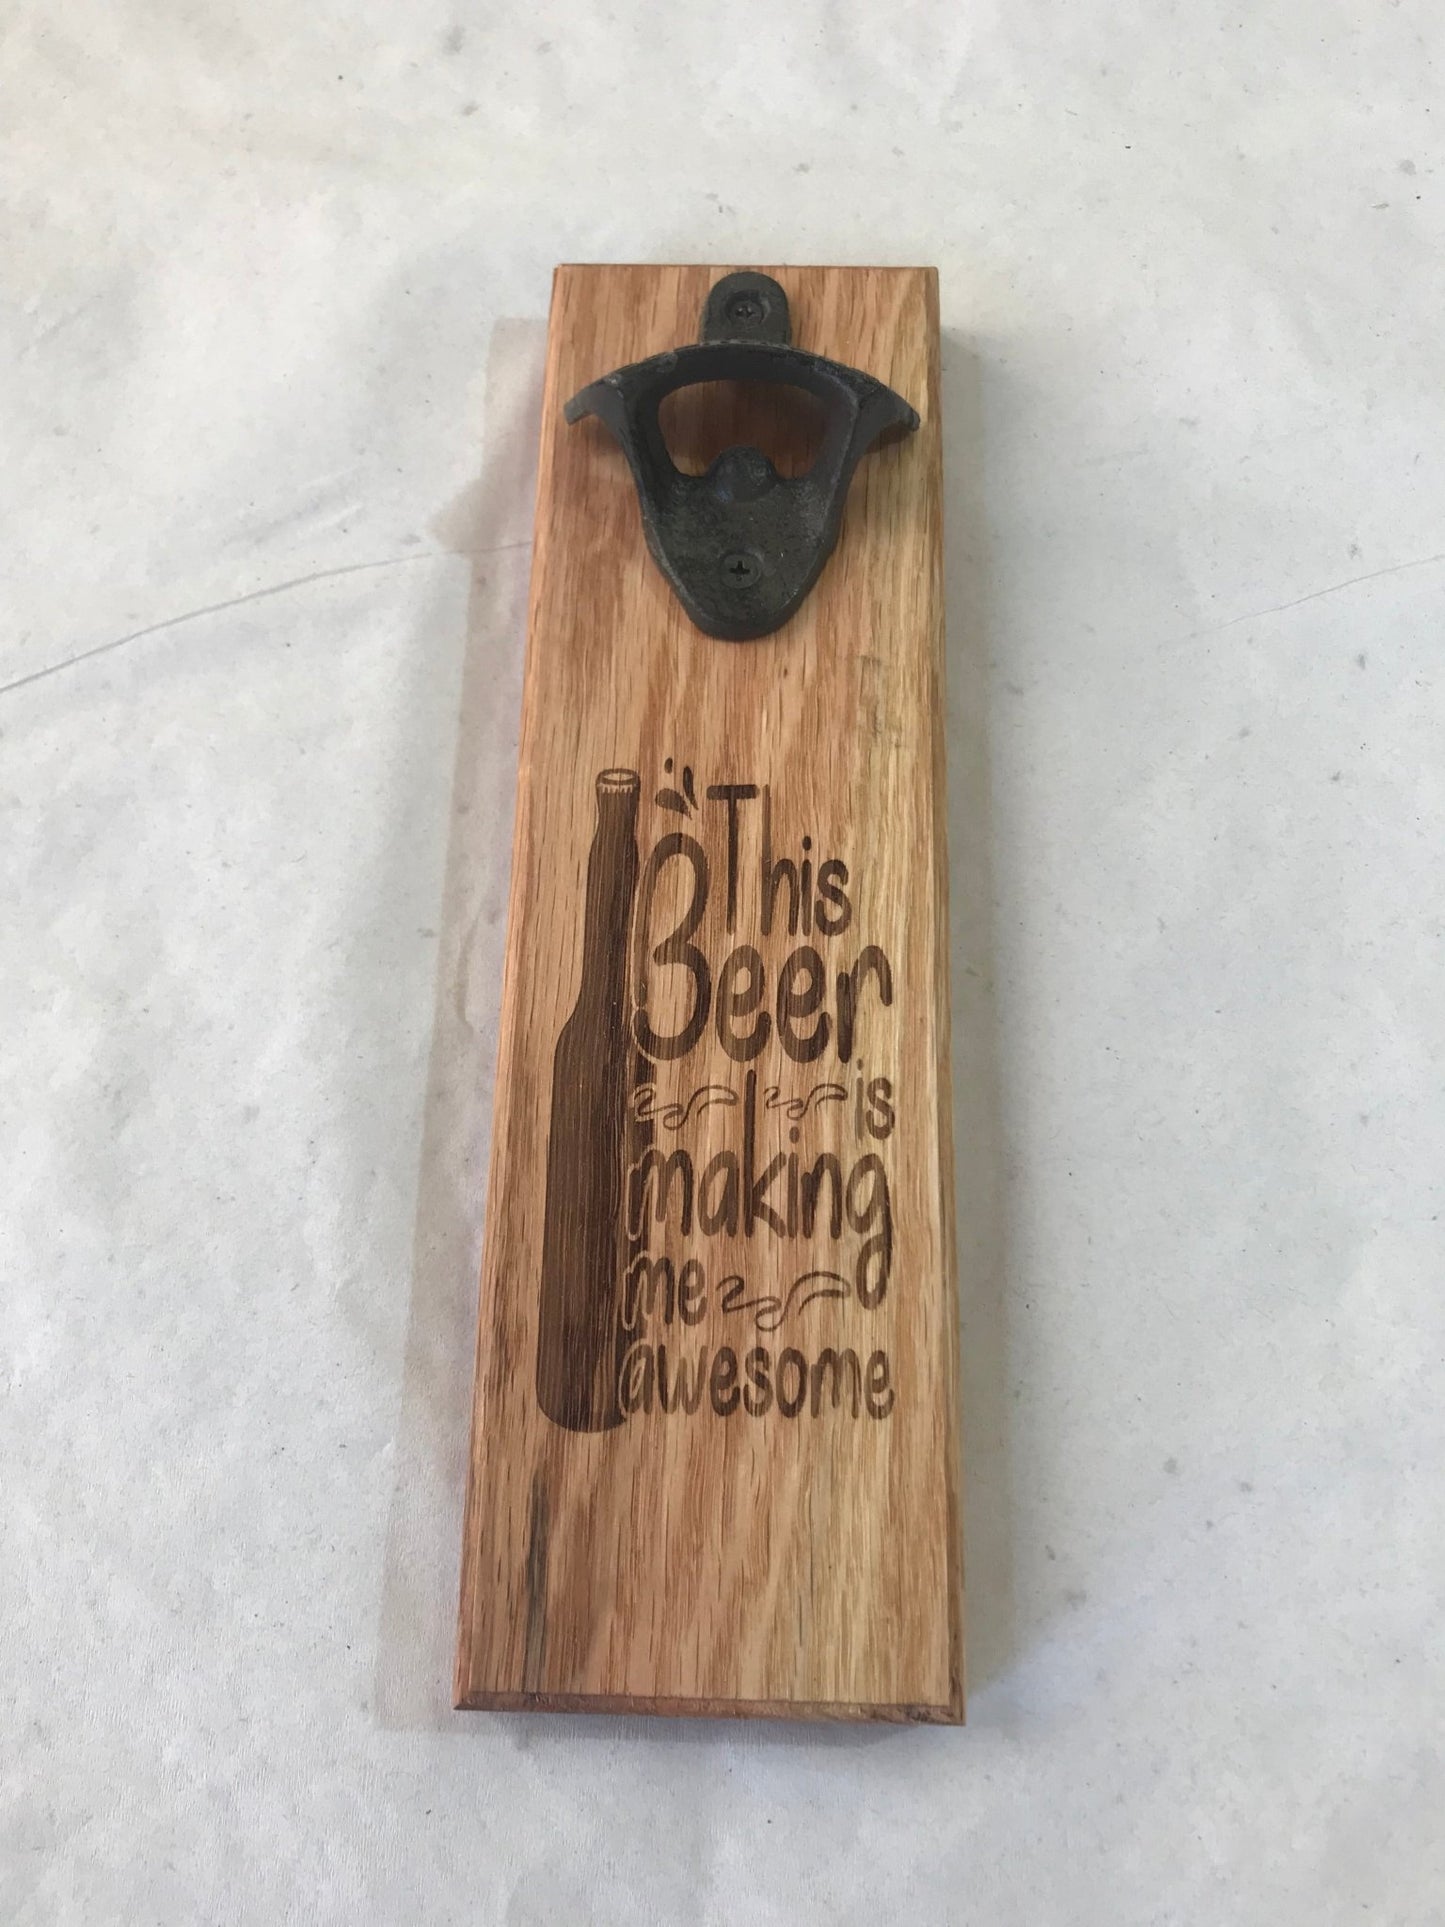 Magnetic Mount Bottle Opener - This beer is making me awesome - Oak - Fenwick & OliverMagnetic Mount Bottle Opener - This beer is making me awesome - OakFenwick & OliverFenwick & OliverMMB-AWESOME-OA